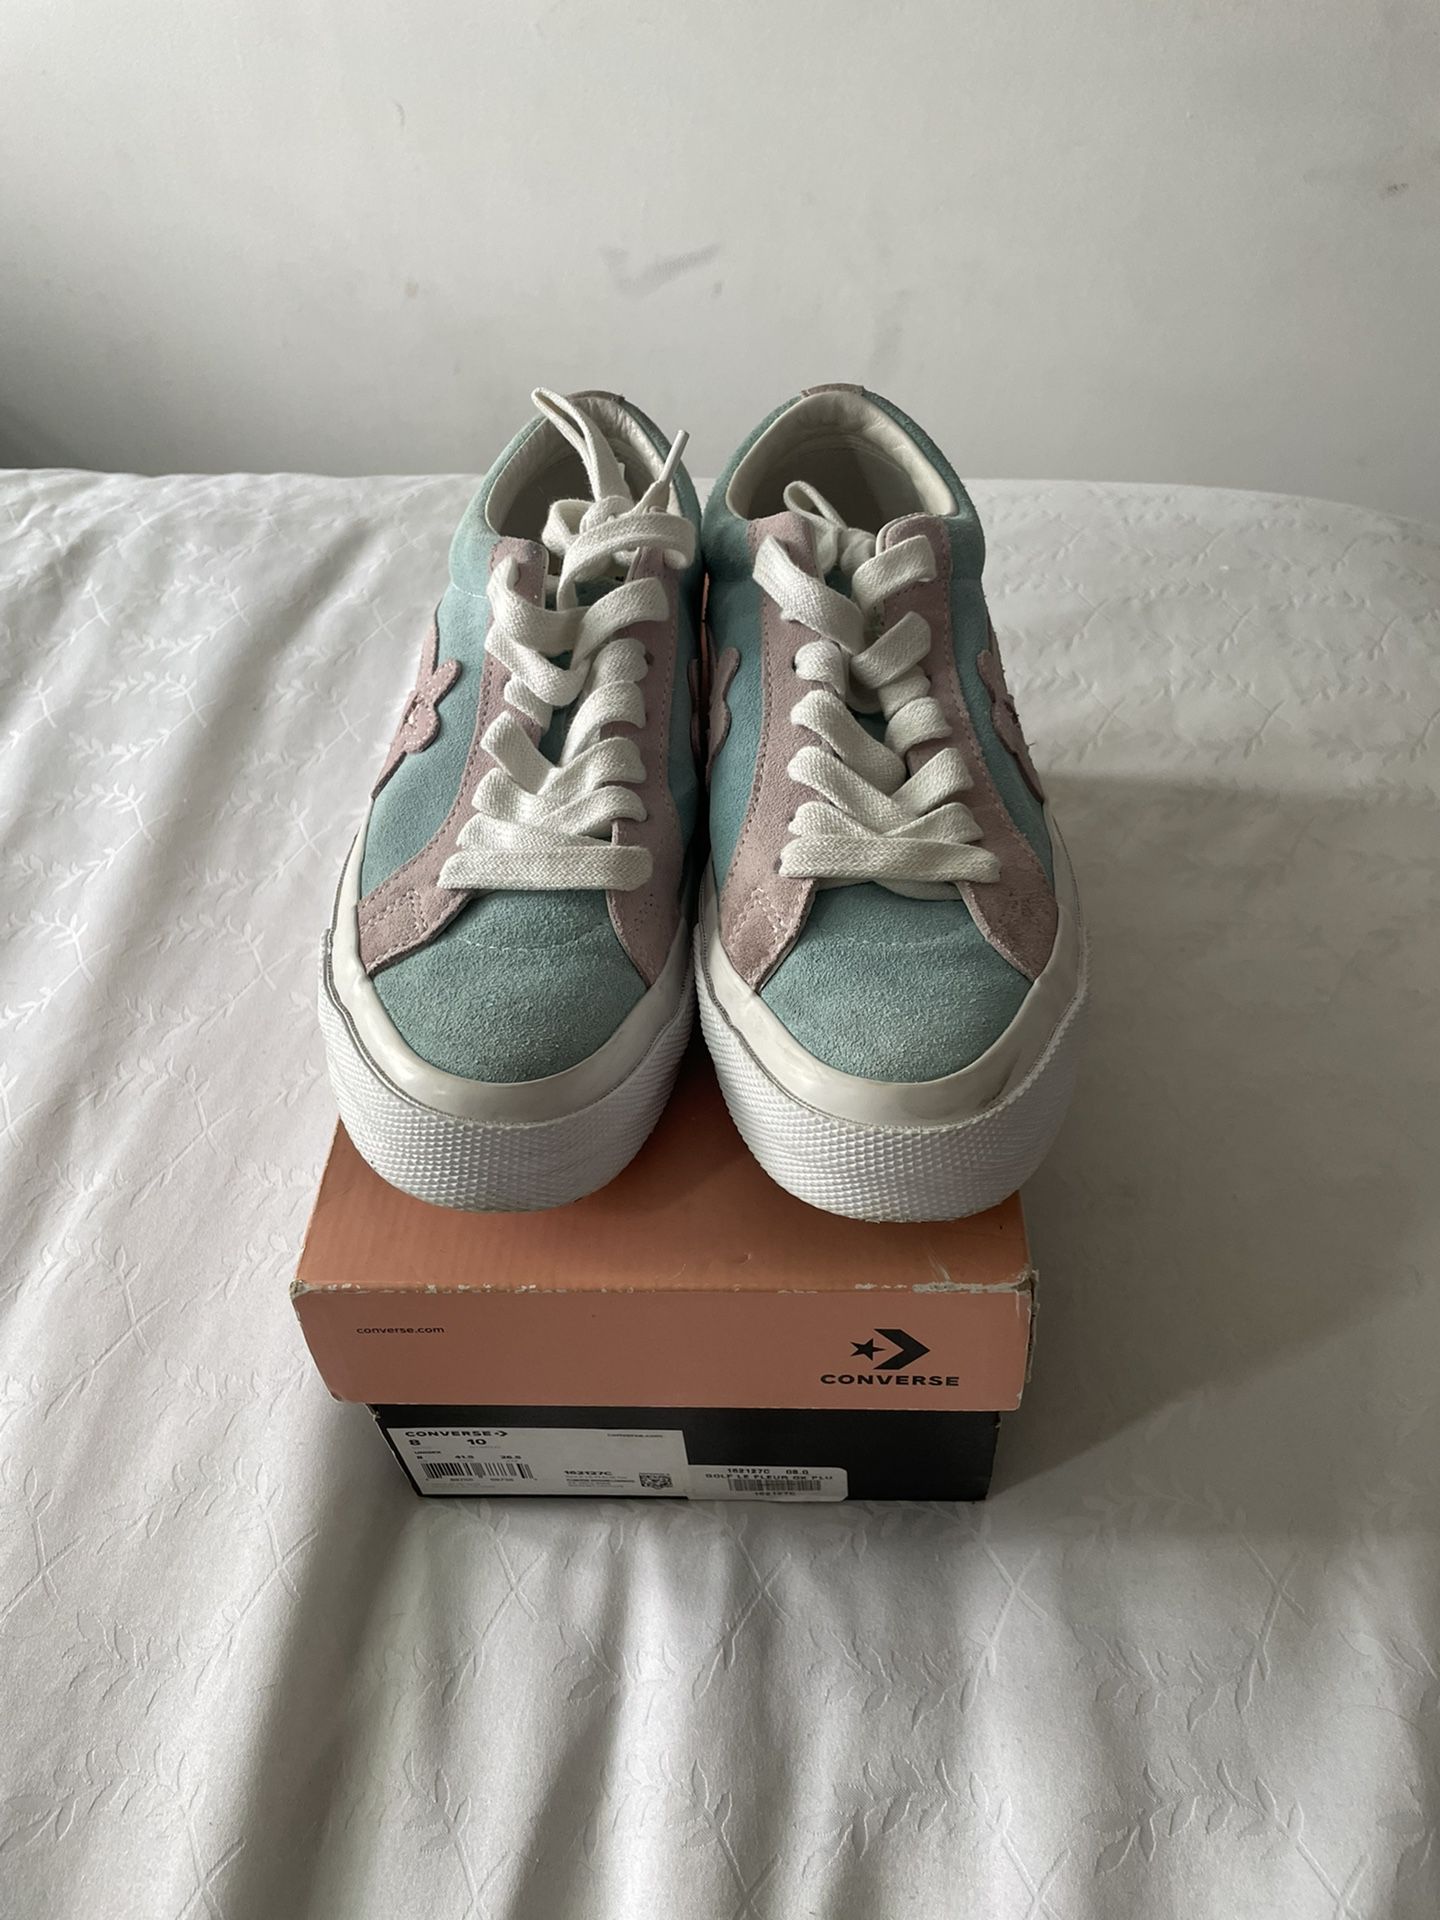 Converse One Star Ox Tyler the Creator Golf Le Fleur Light Blue Pink Size 8 for Sale in Queens, - OfferUp